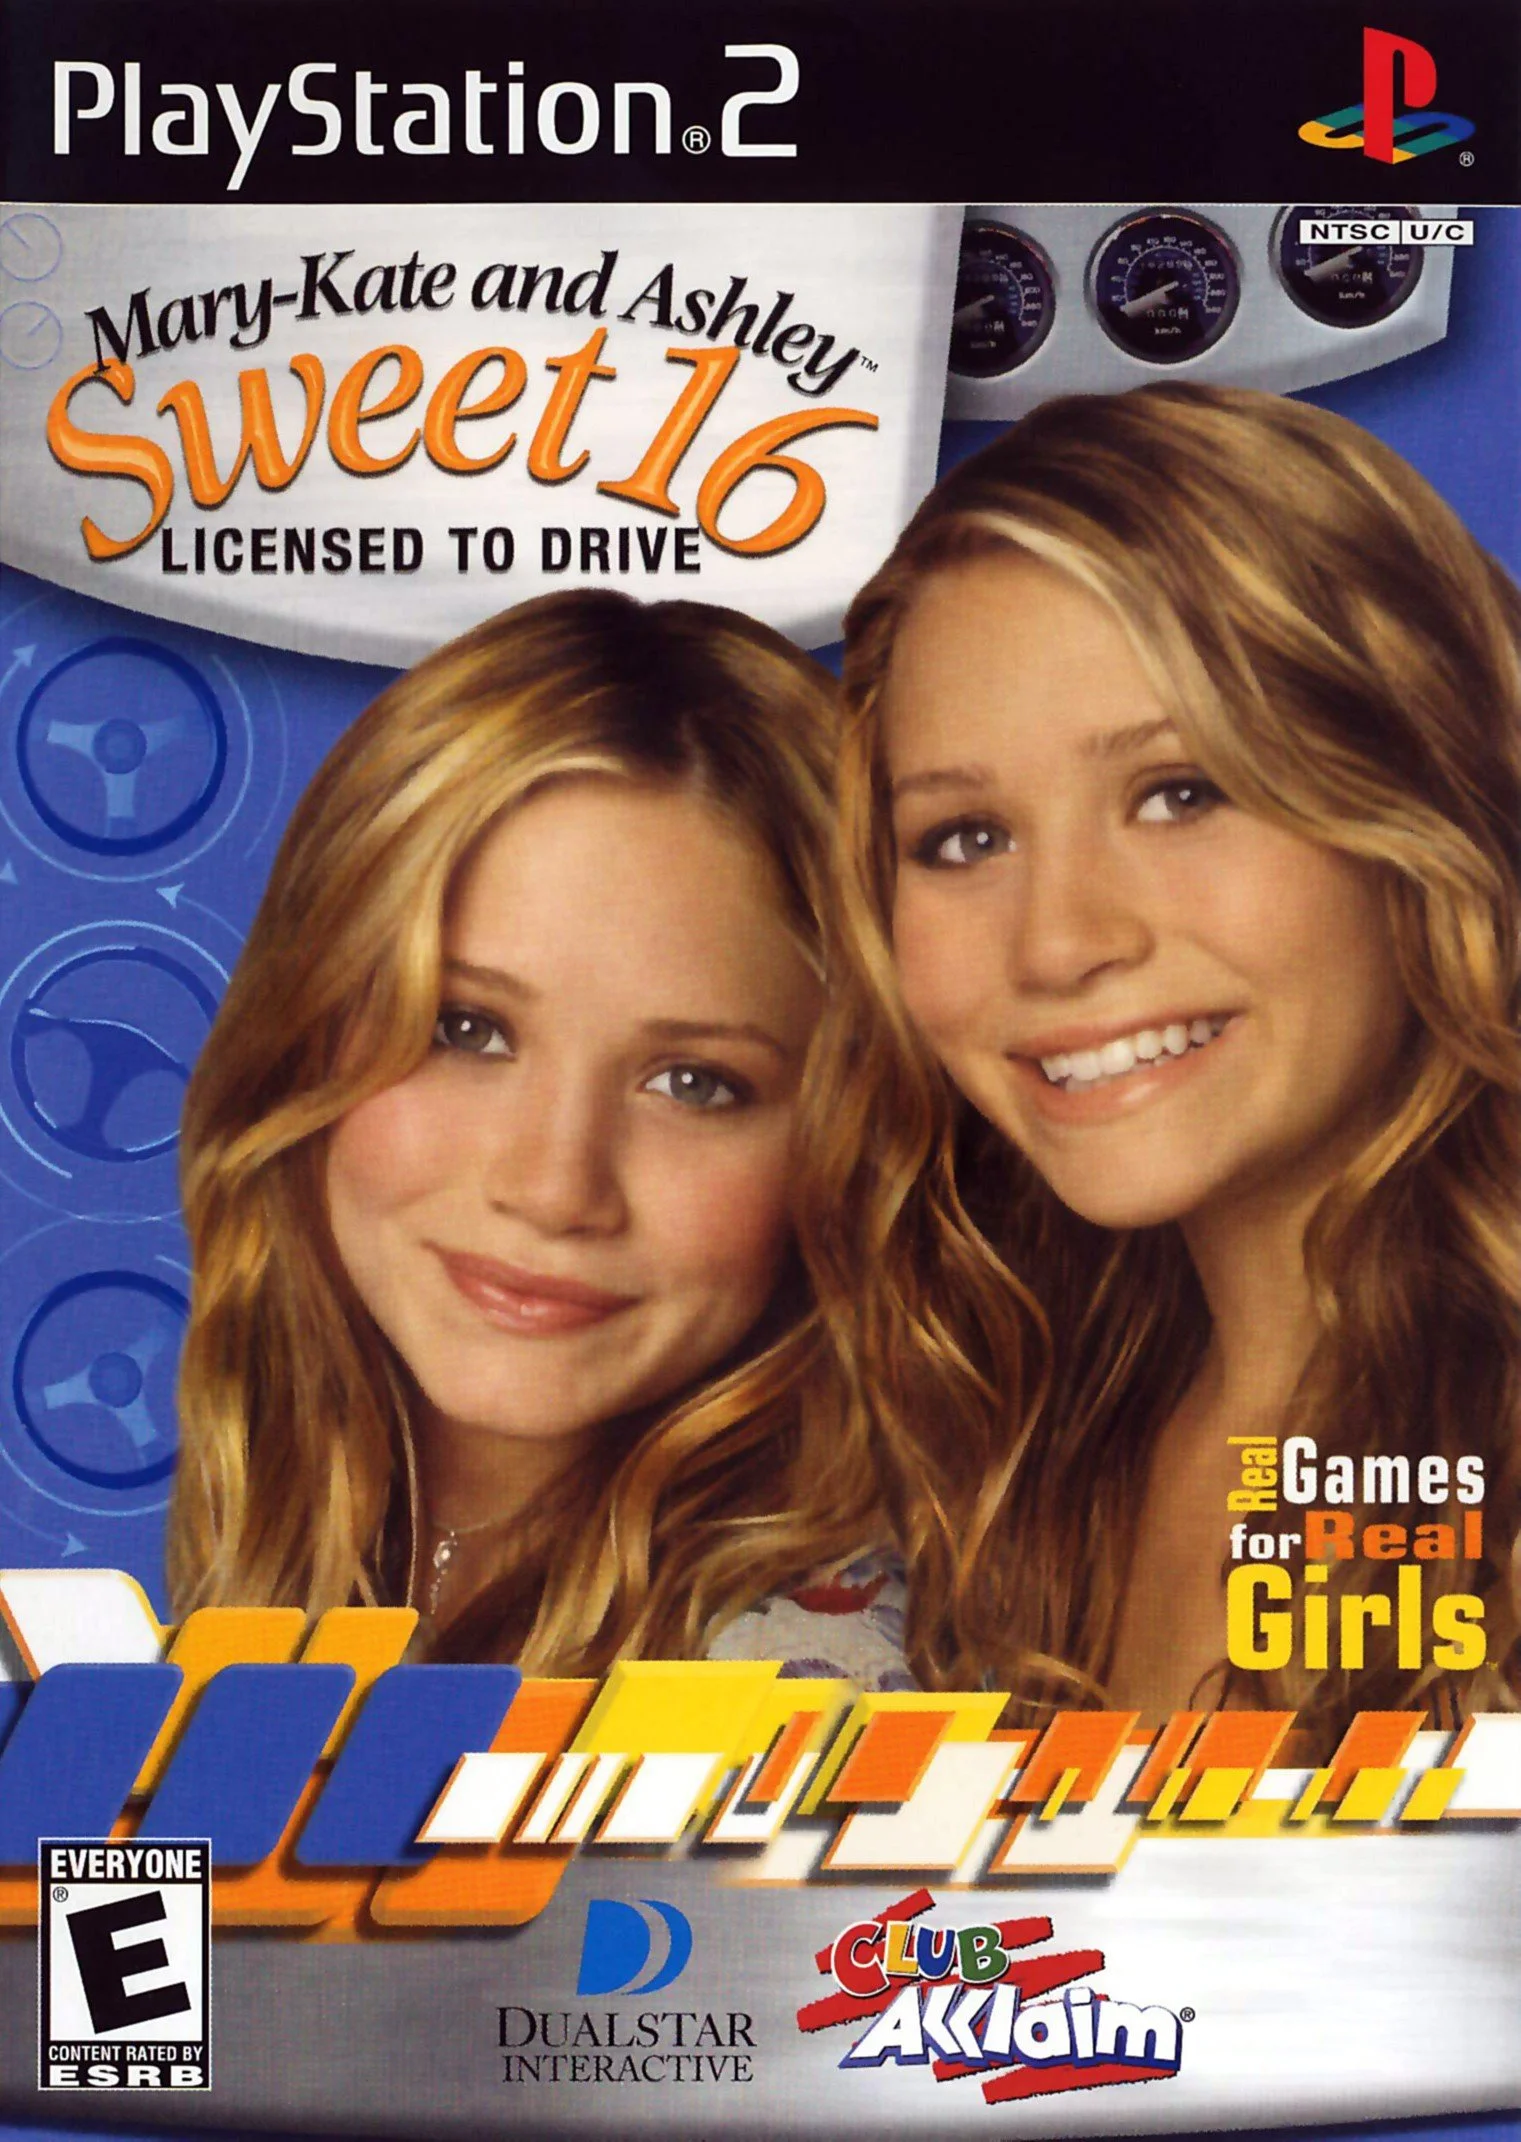 Mary-Kate And Ashley: Sweet 16